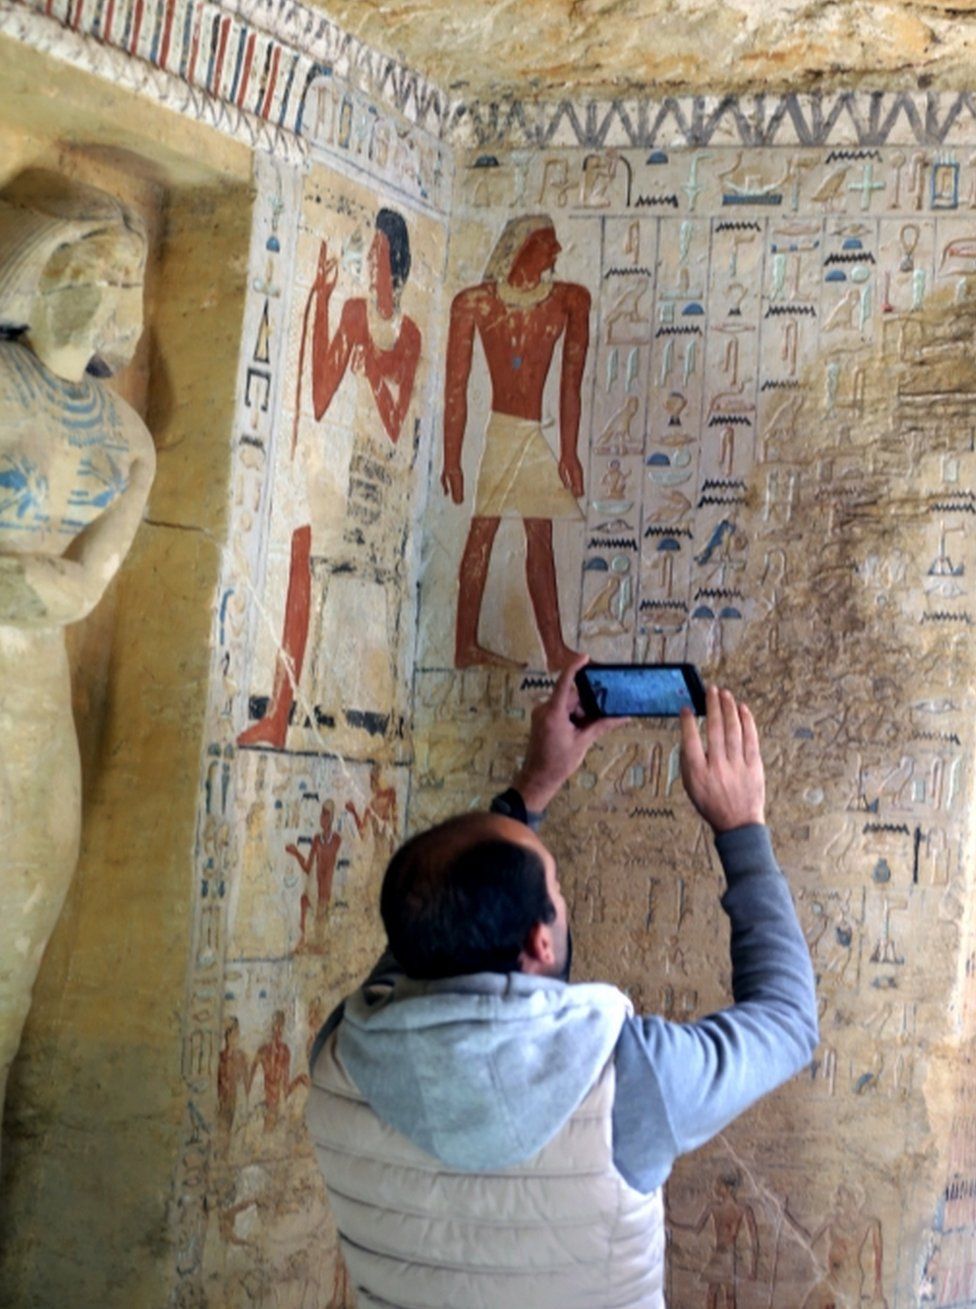 A man takes photos of the well-preserved hieroglyphs inside the newly-discovered tomb of Wahtye